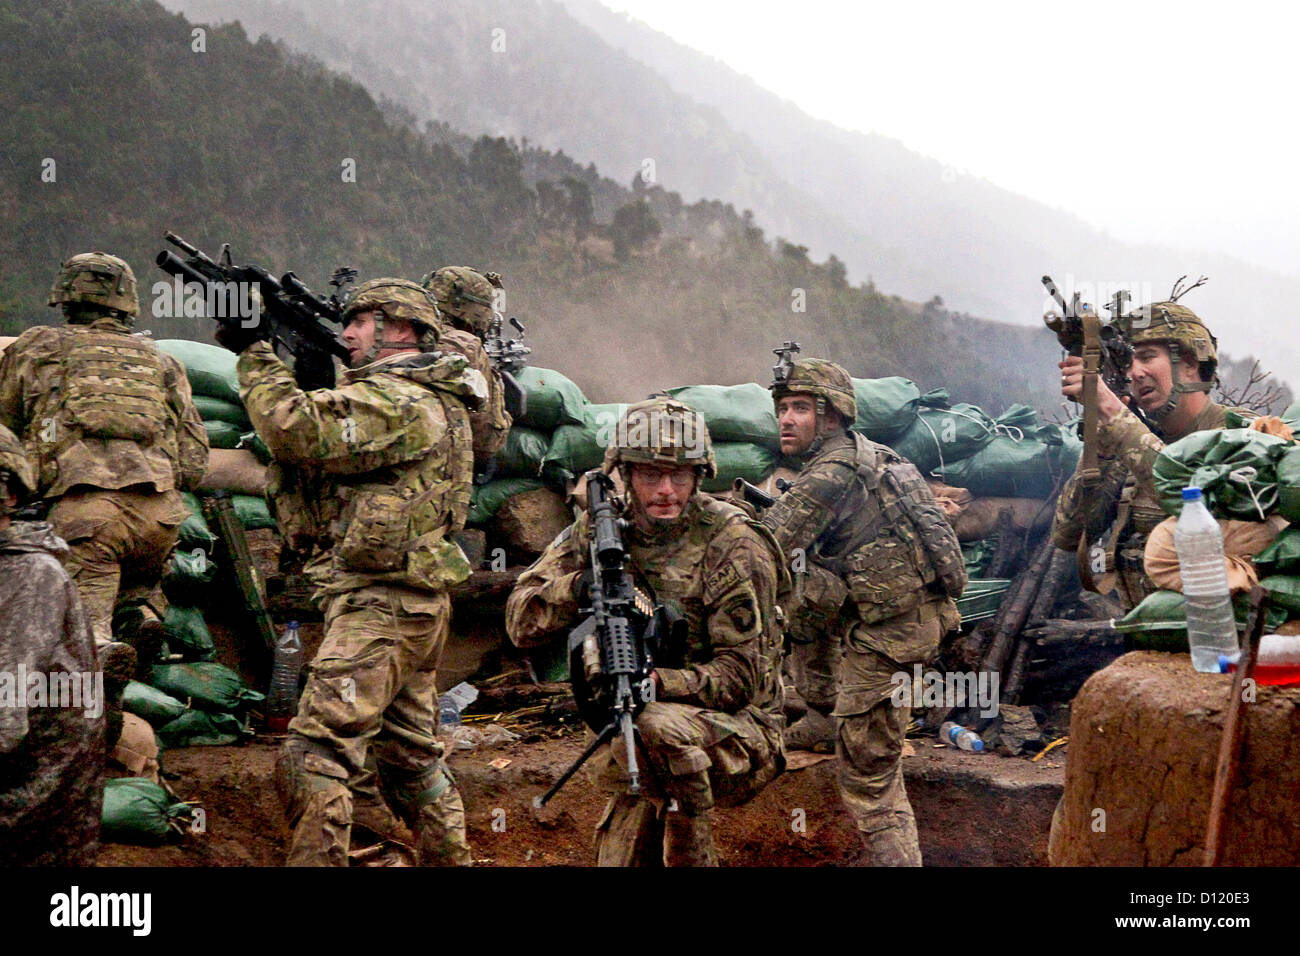 US Soldiers return fire during a firefight with Taliban forces in Barawala Kalay Valley March 31, 2011 in Kunar province, Afghanistan. Stock Photo